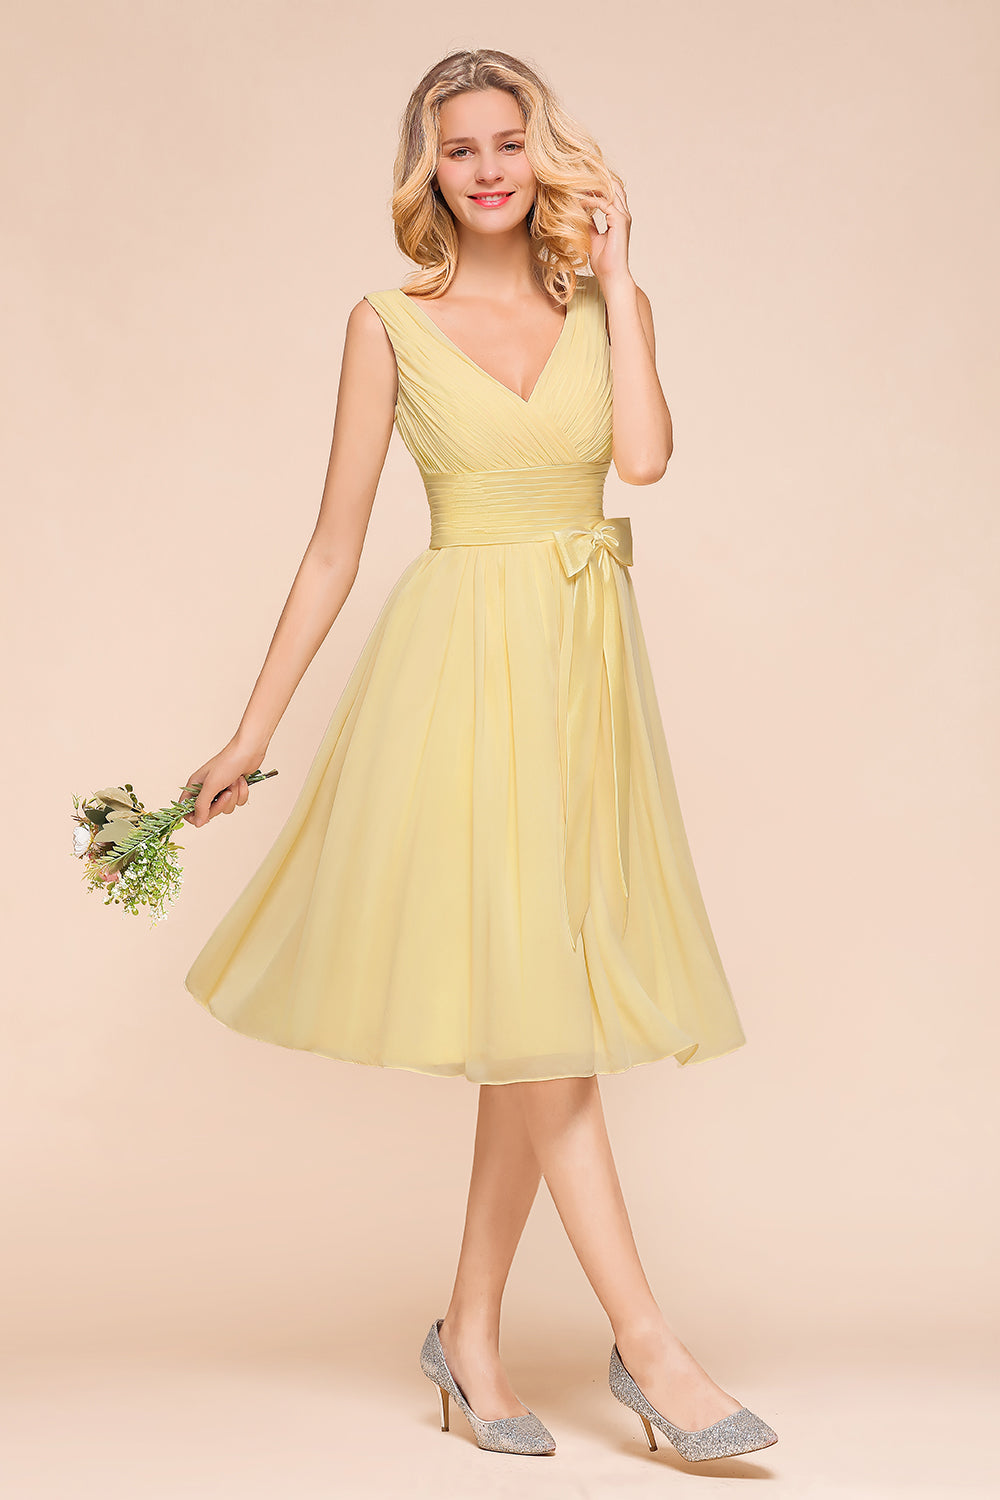 Classy Short A-line Chiffon Wide Straps V-neck Bridesmaid Dress With Bowknot-BIZTUNNEL